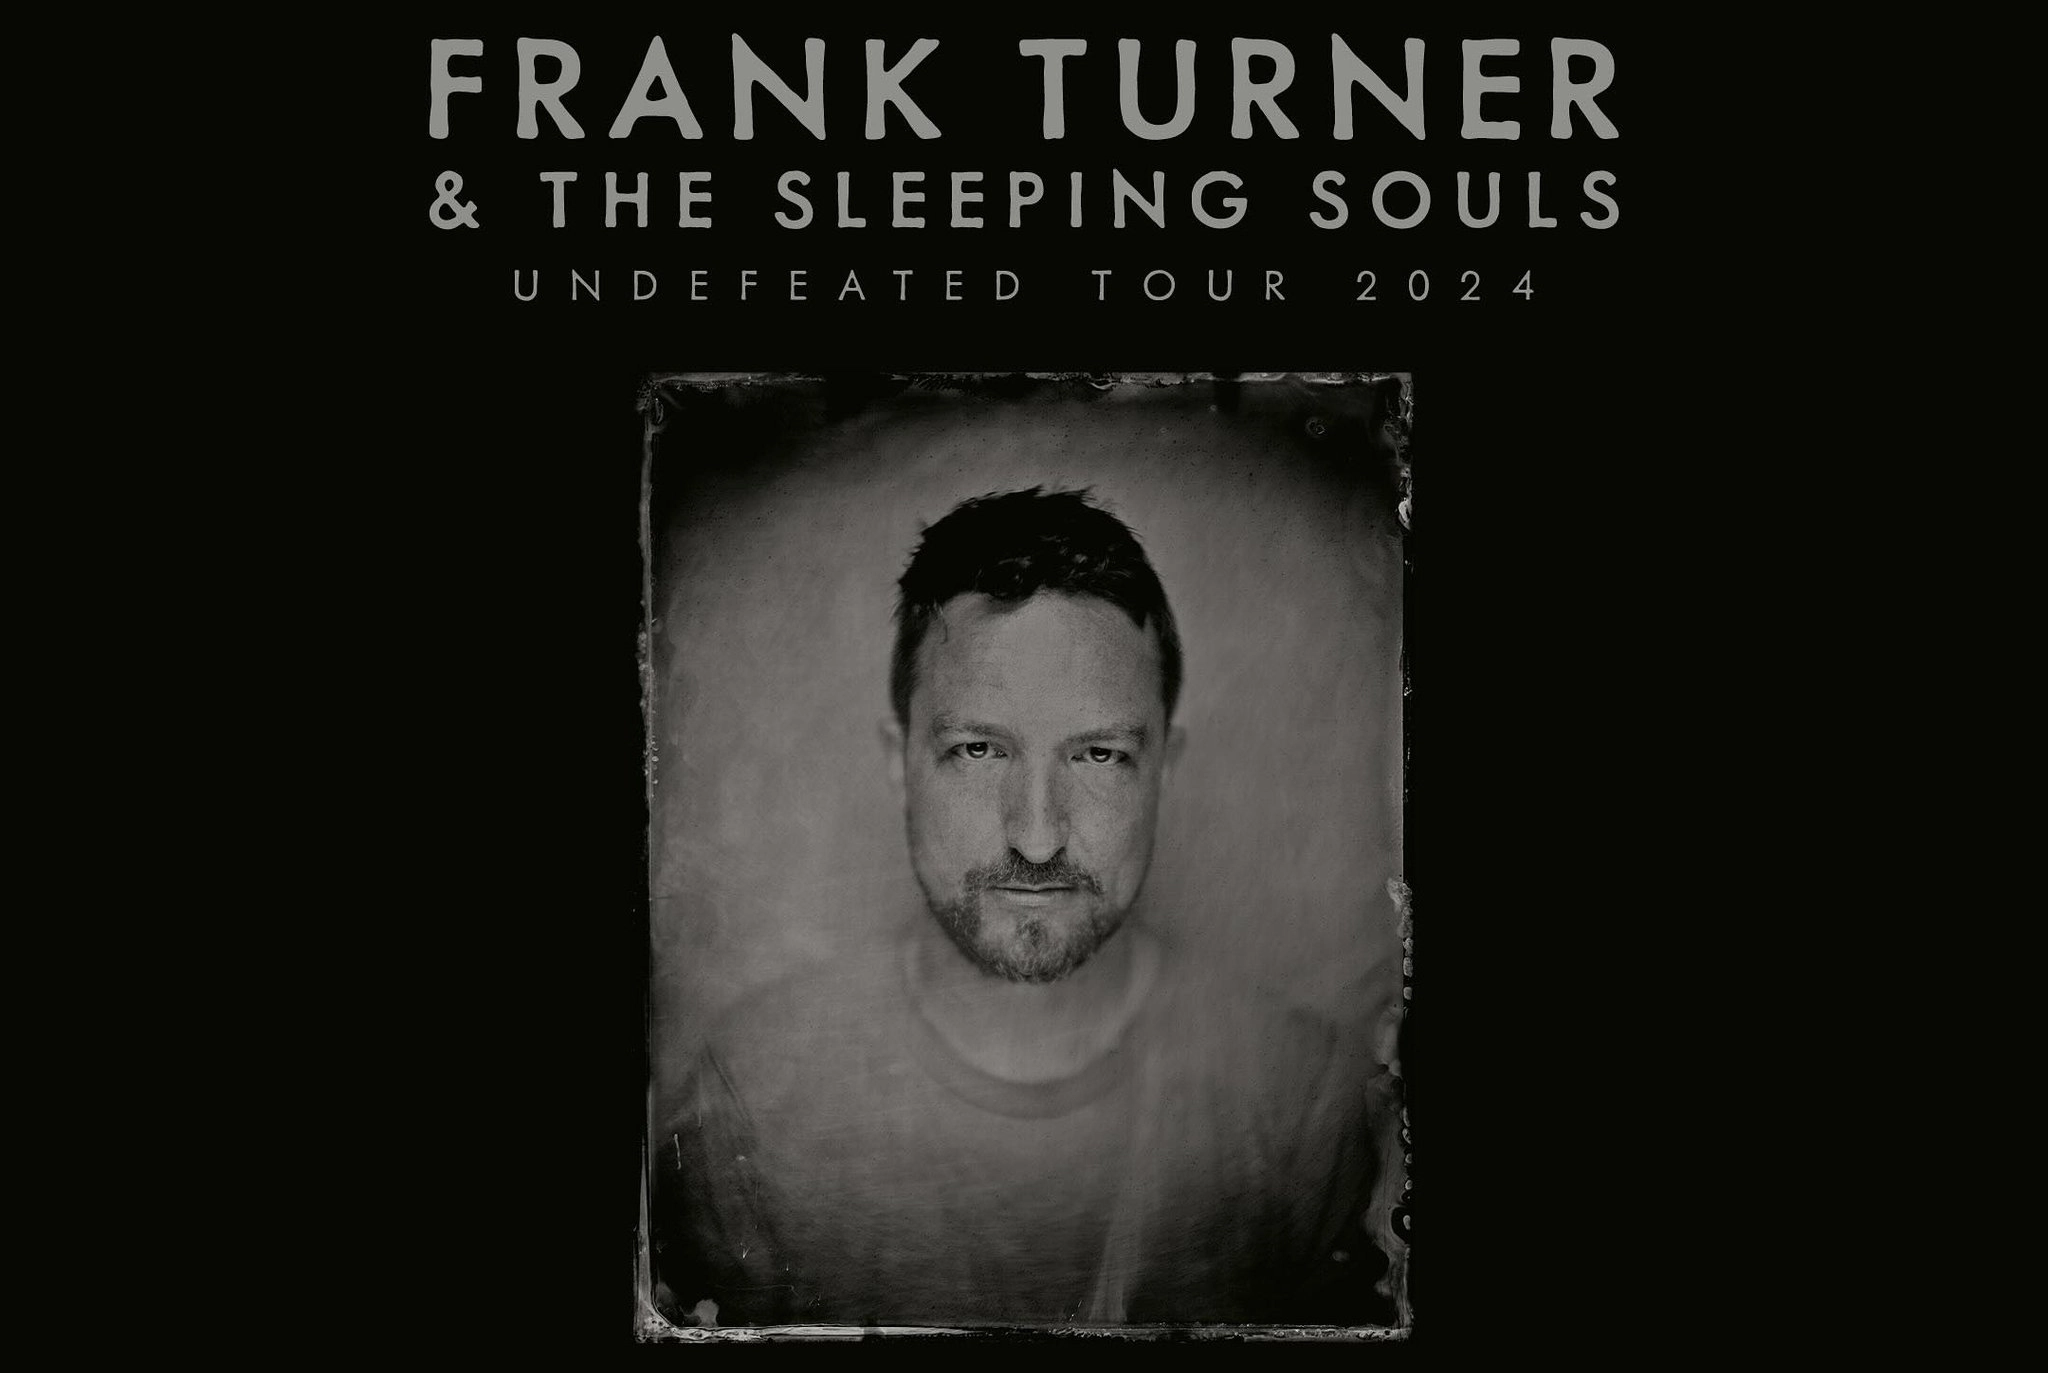 Frank Turner And The Sleeping Souls at Manchester Academy Tickets